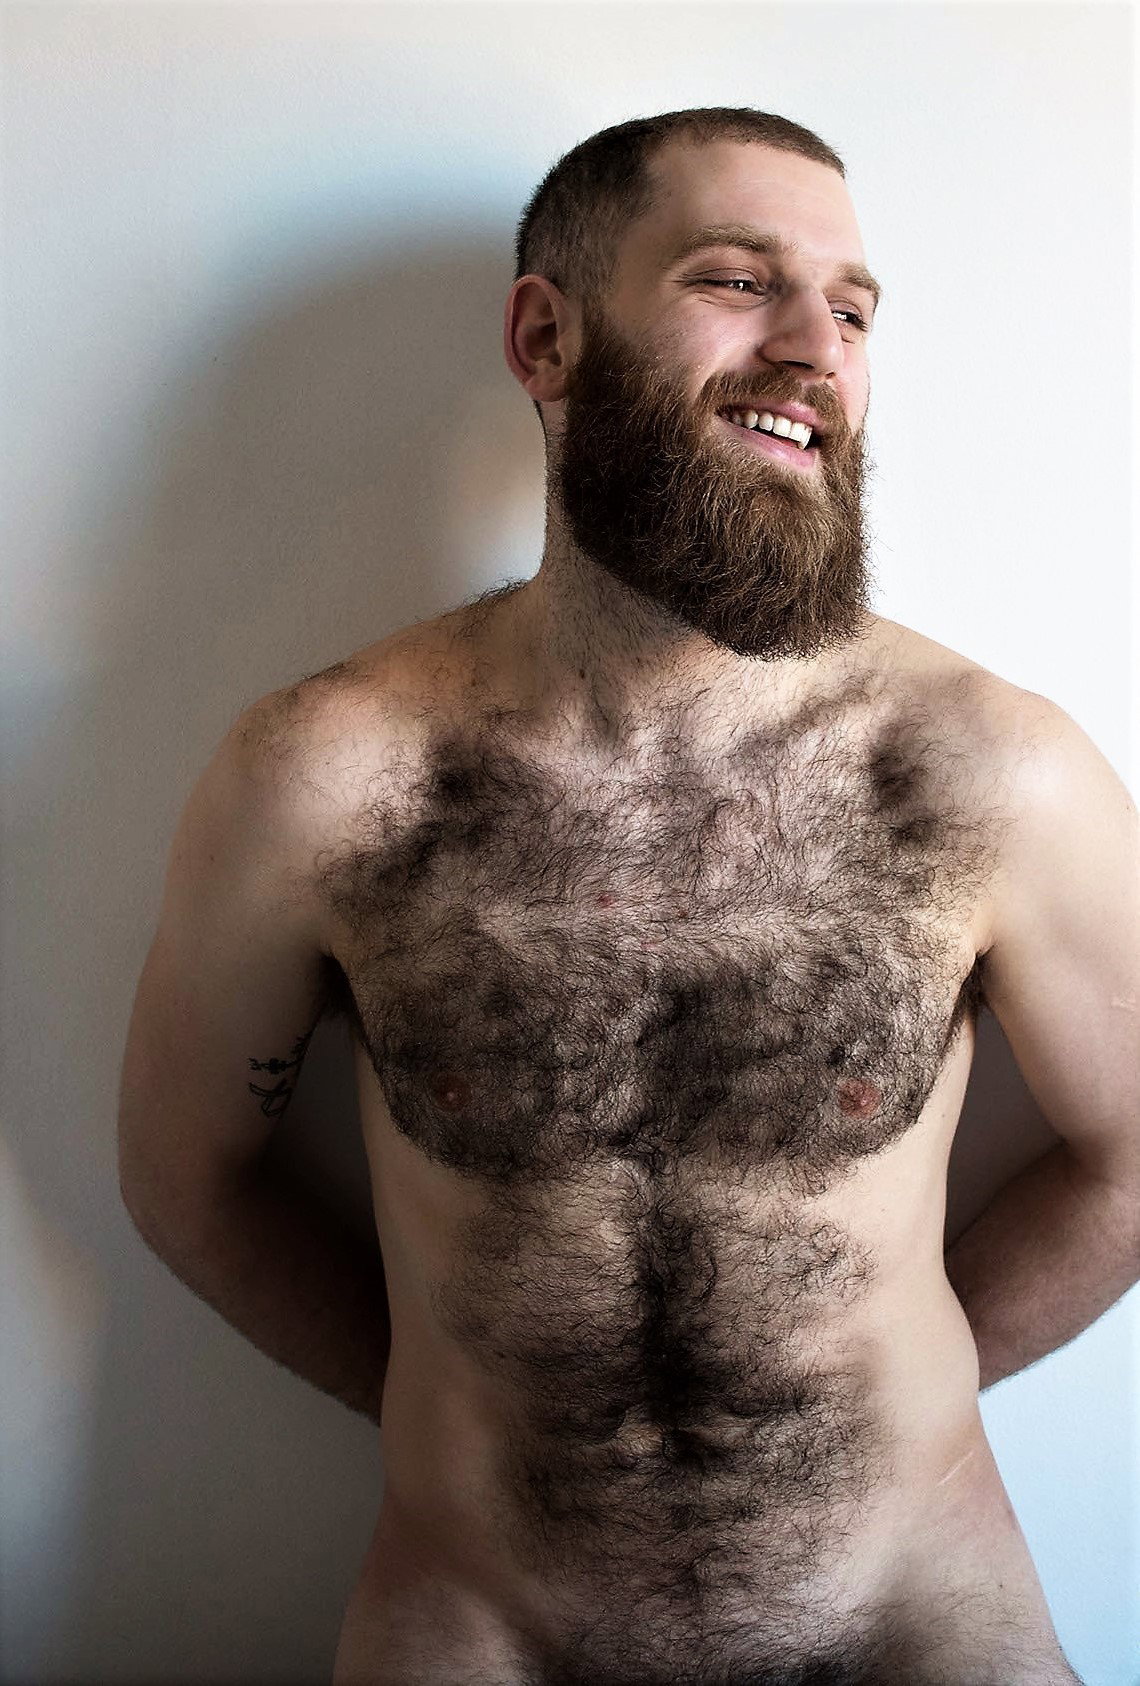 Photo by Smitty with the username @Resol702,  May 16, 2019 at 9:25 PM. The post is about the topic Gay Hairy Men